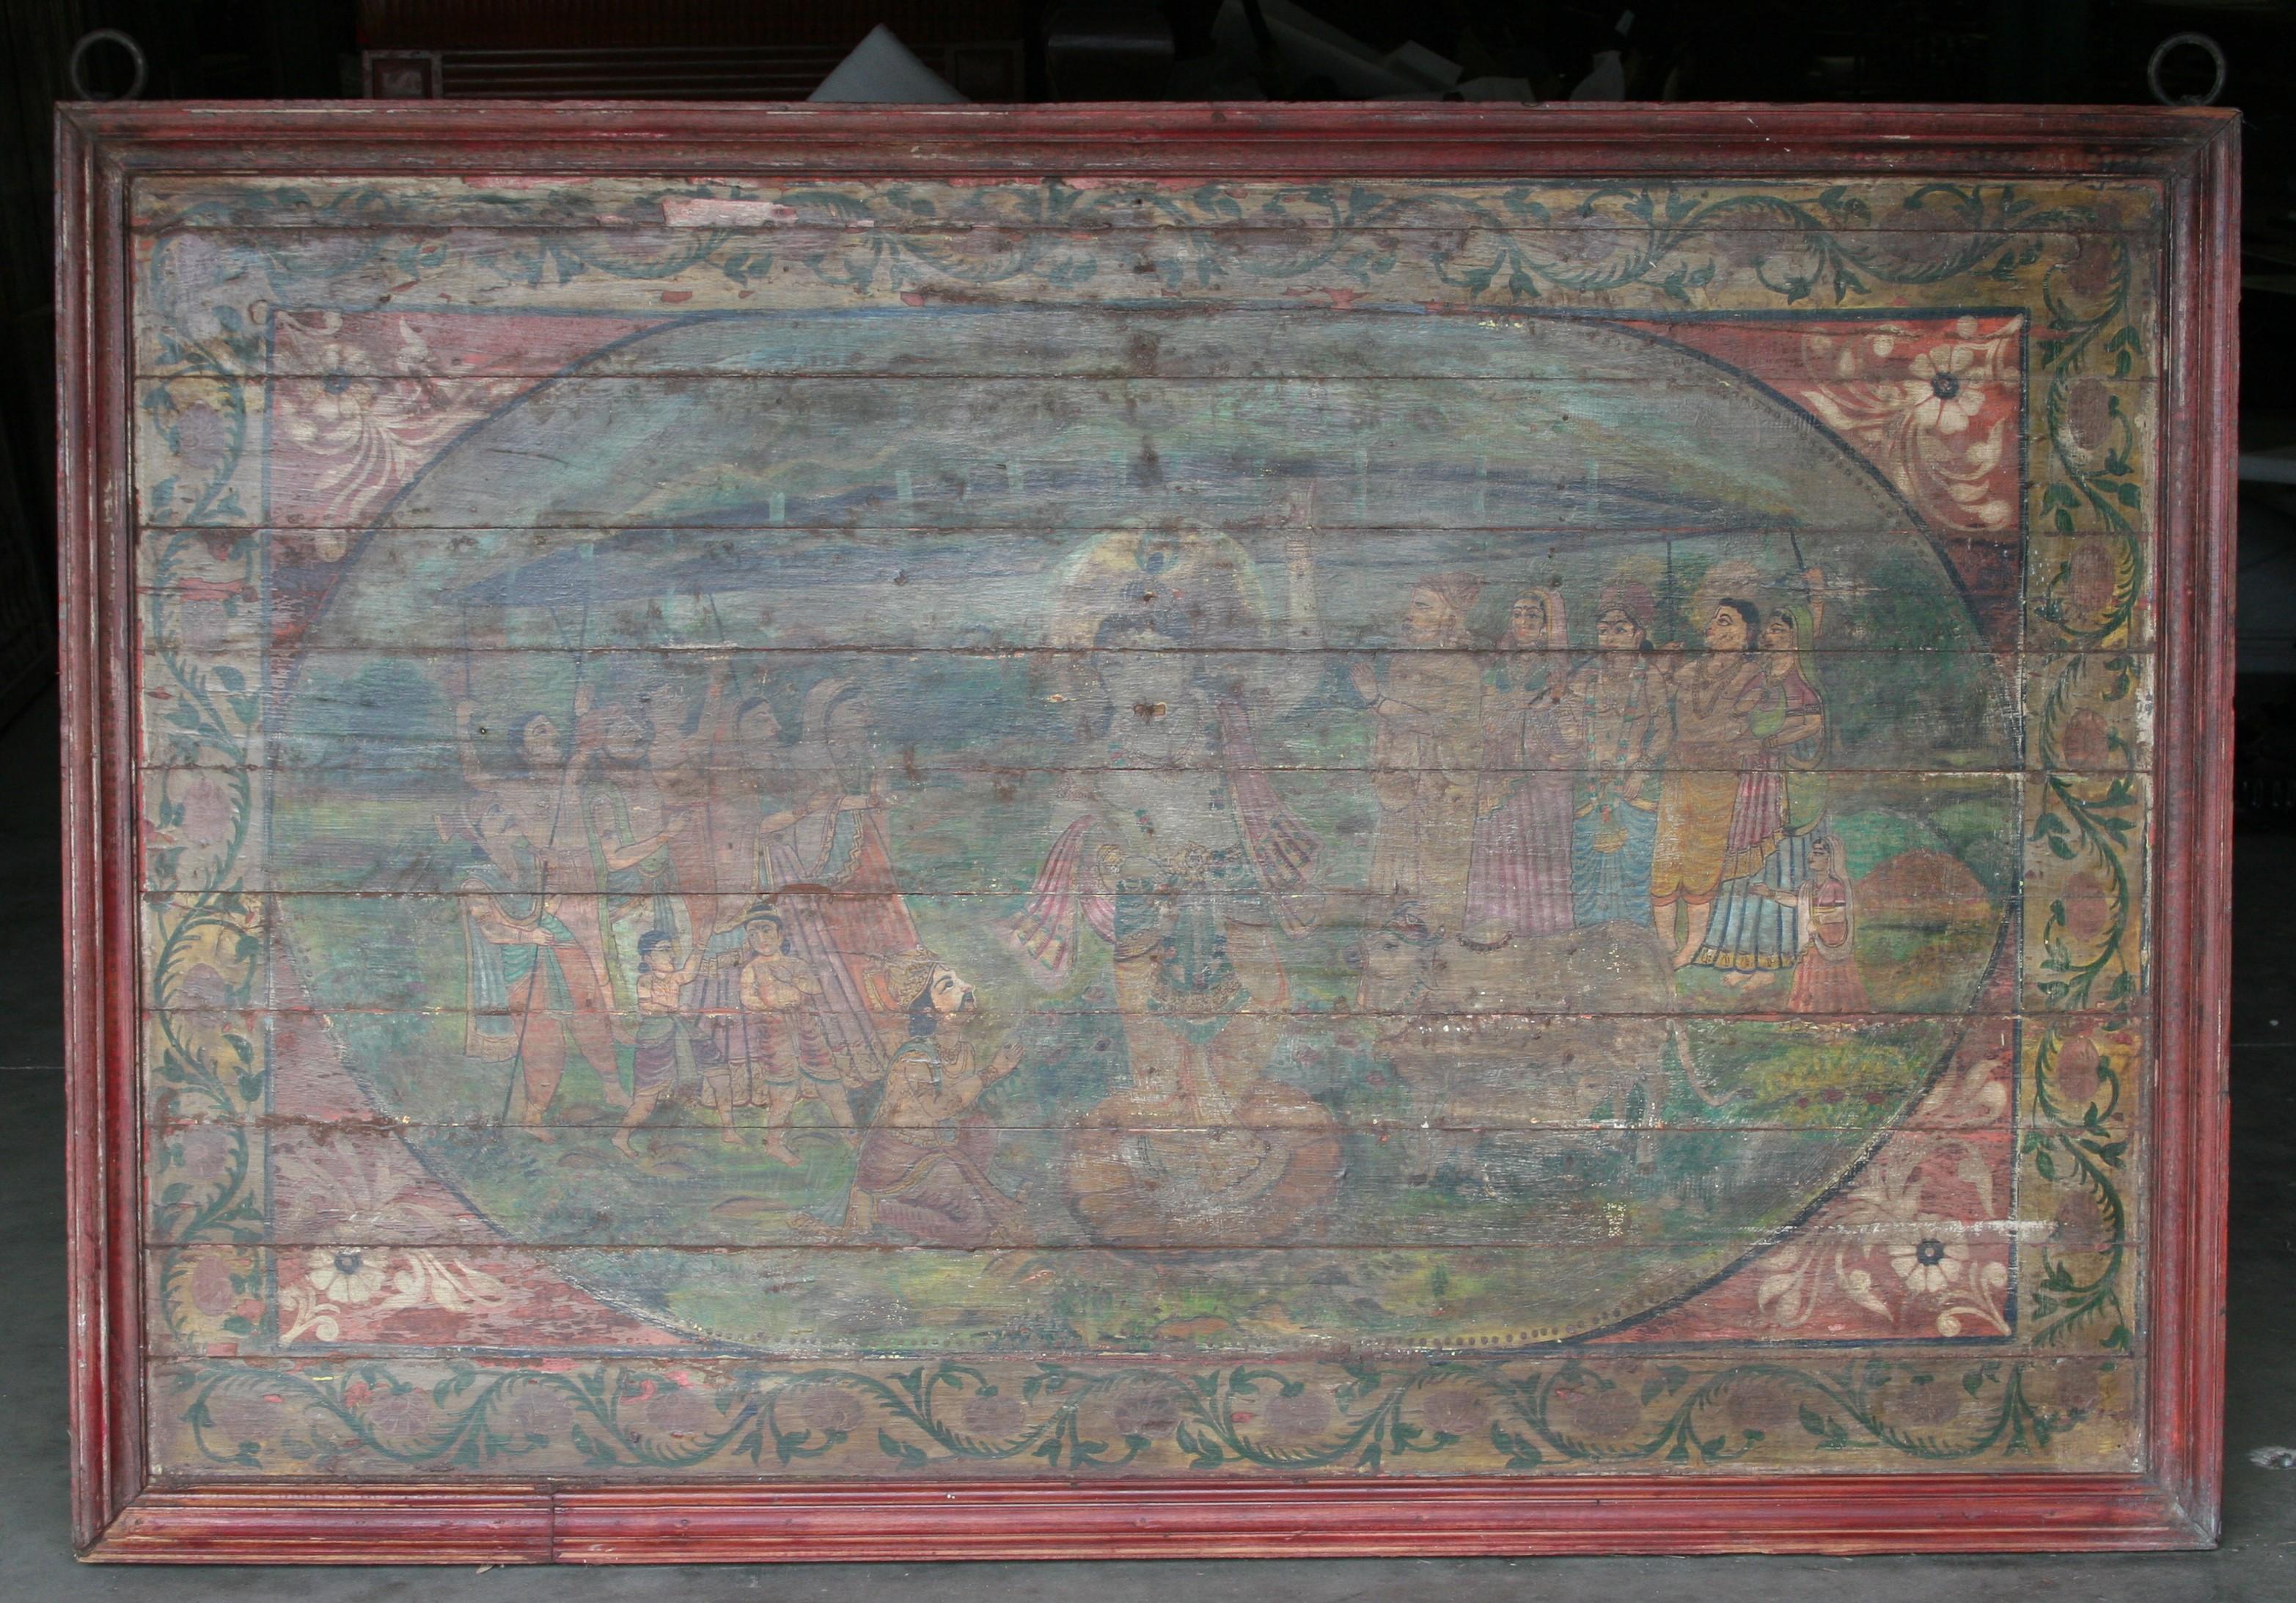 Years of black smoke from the oil lamps used in the temple darkened the surface of the painting. The two hand forged iron rings used for hanging the painting can be seen on either end. The painting depicts an important scene from the Hindu epic